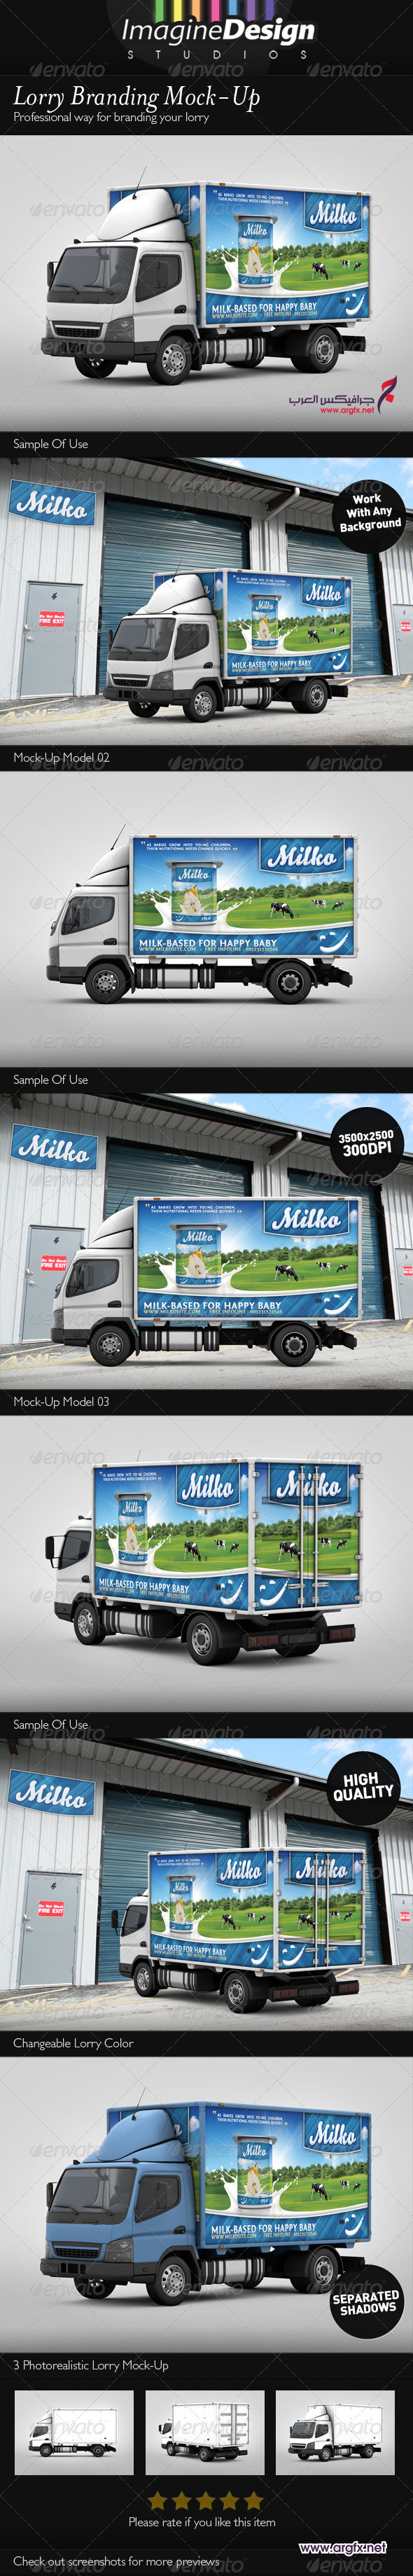  GraphicRiver - Lorry Branding Mock-Up